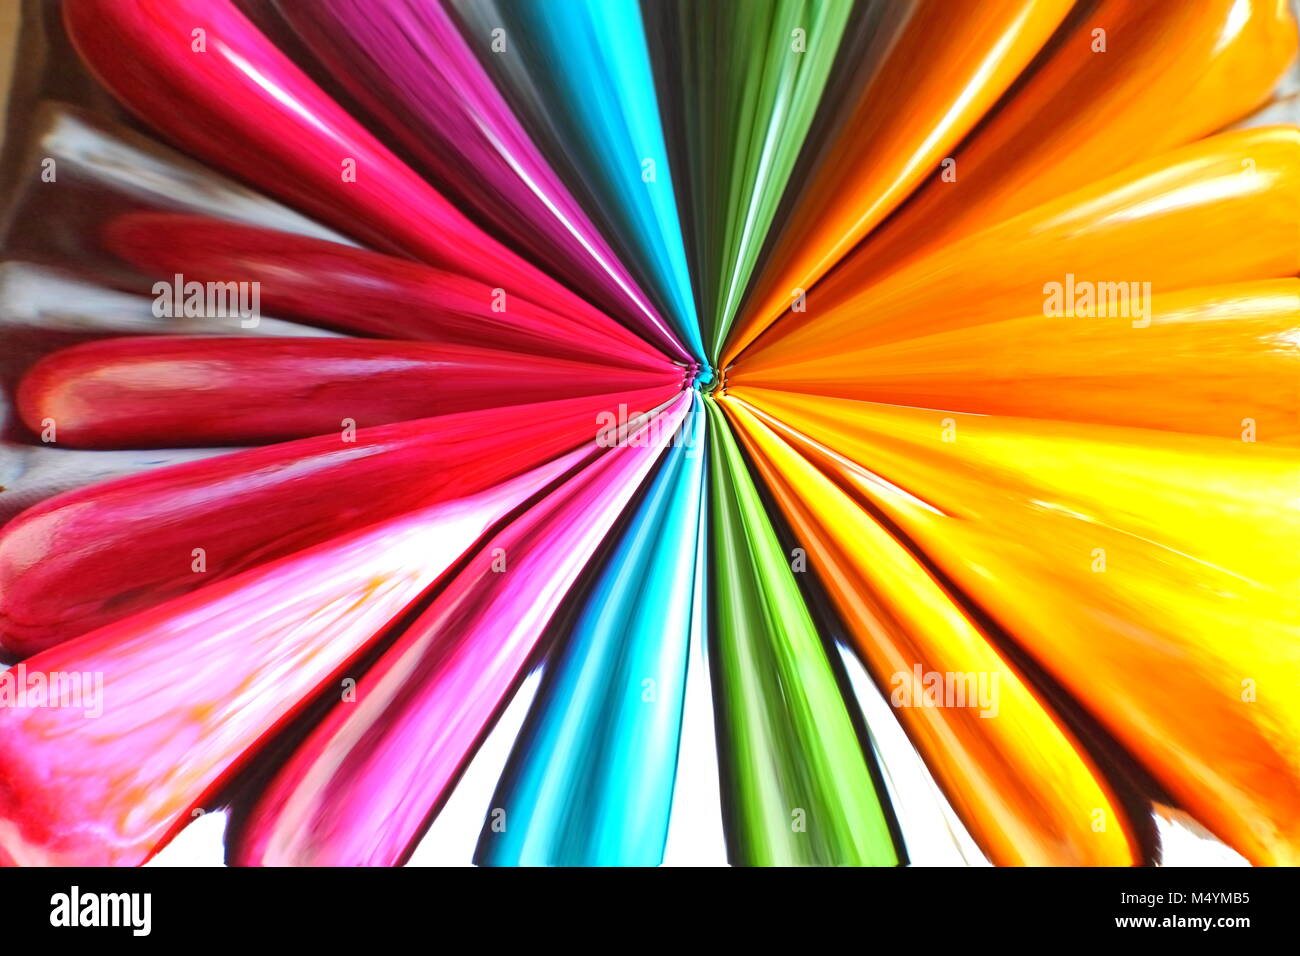 Distorted picture of rainbow colors. Abstract  rippled  background. Colorful fusion spectrum. Stock Photo